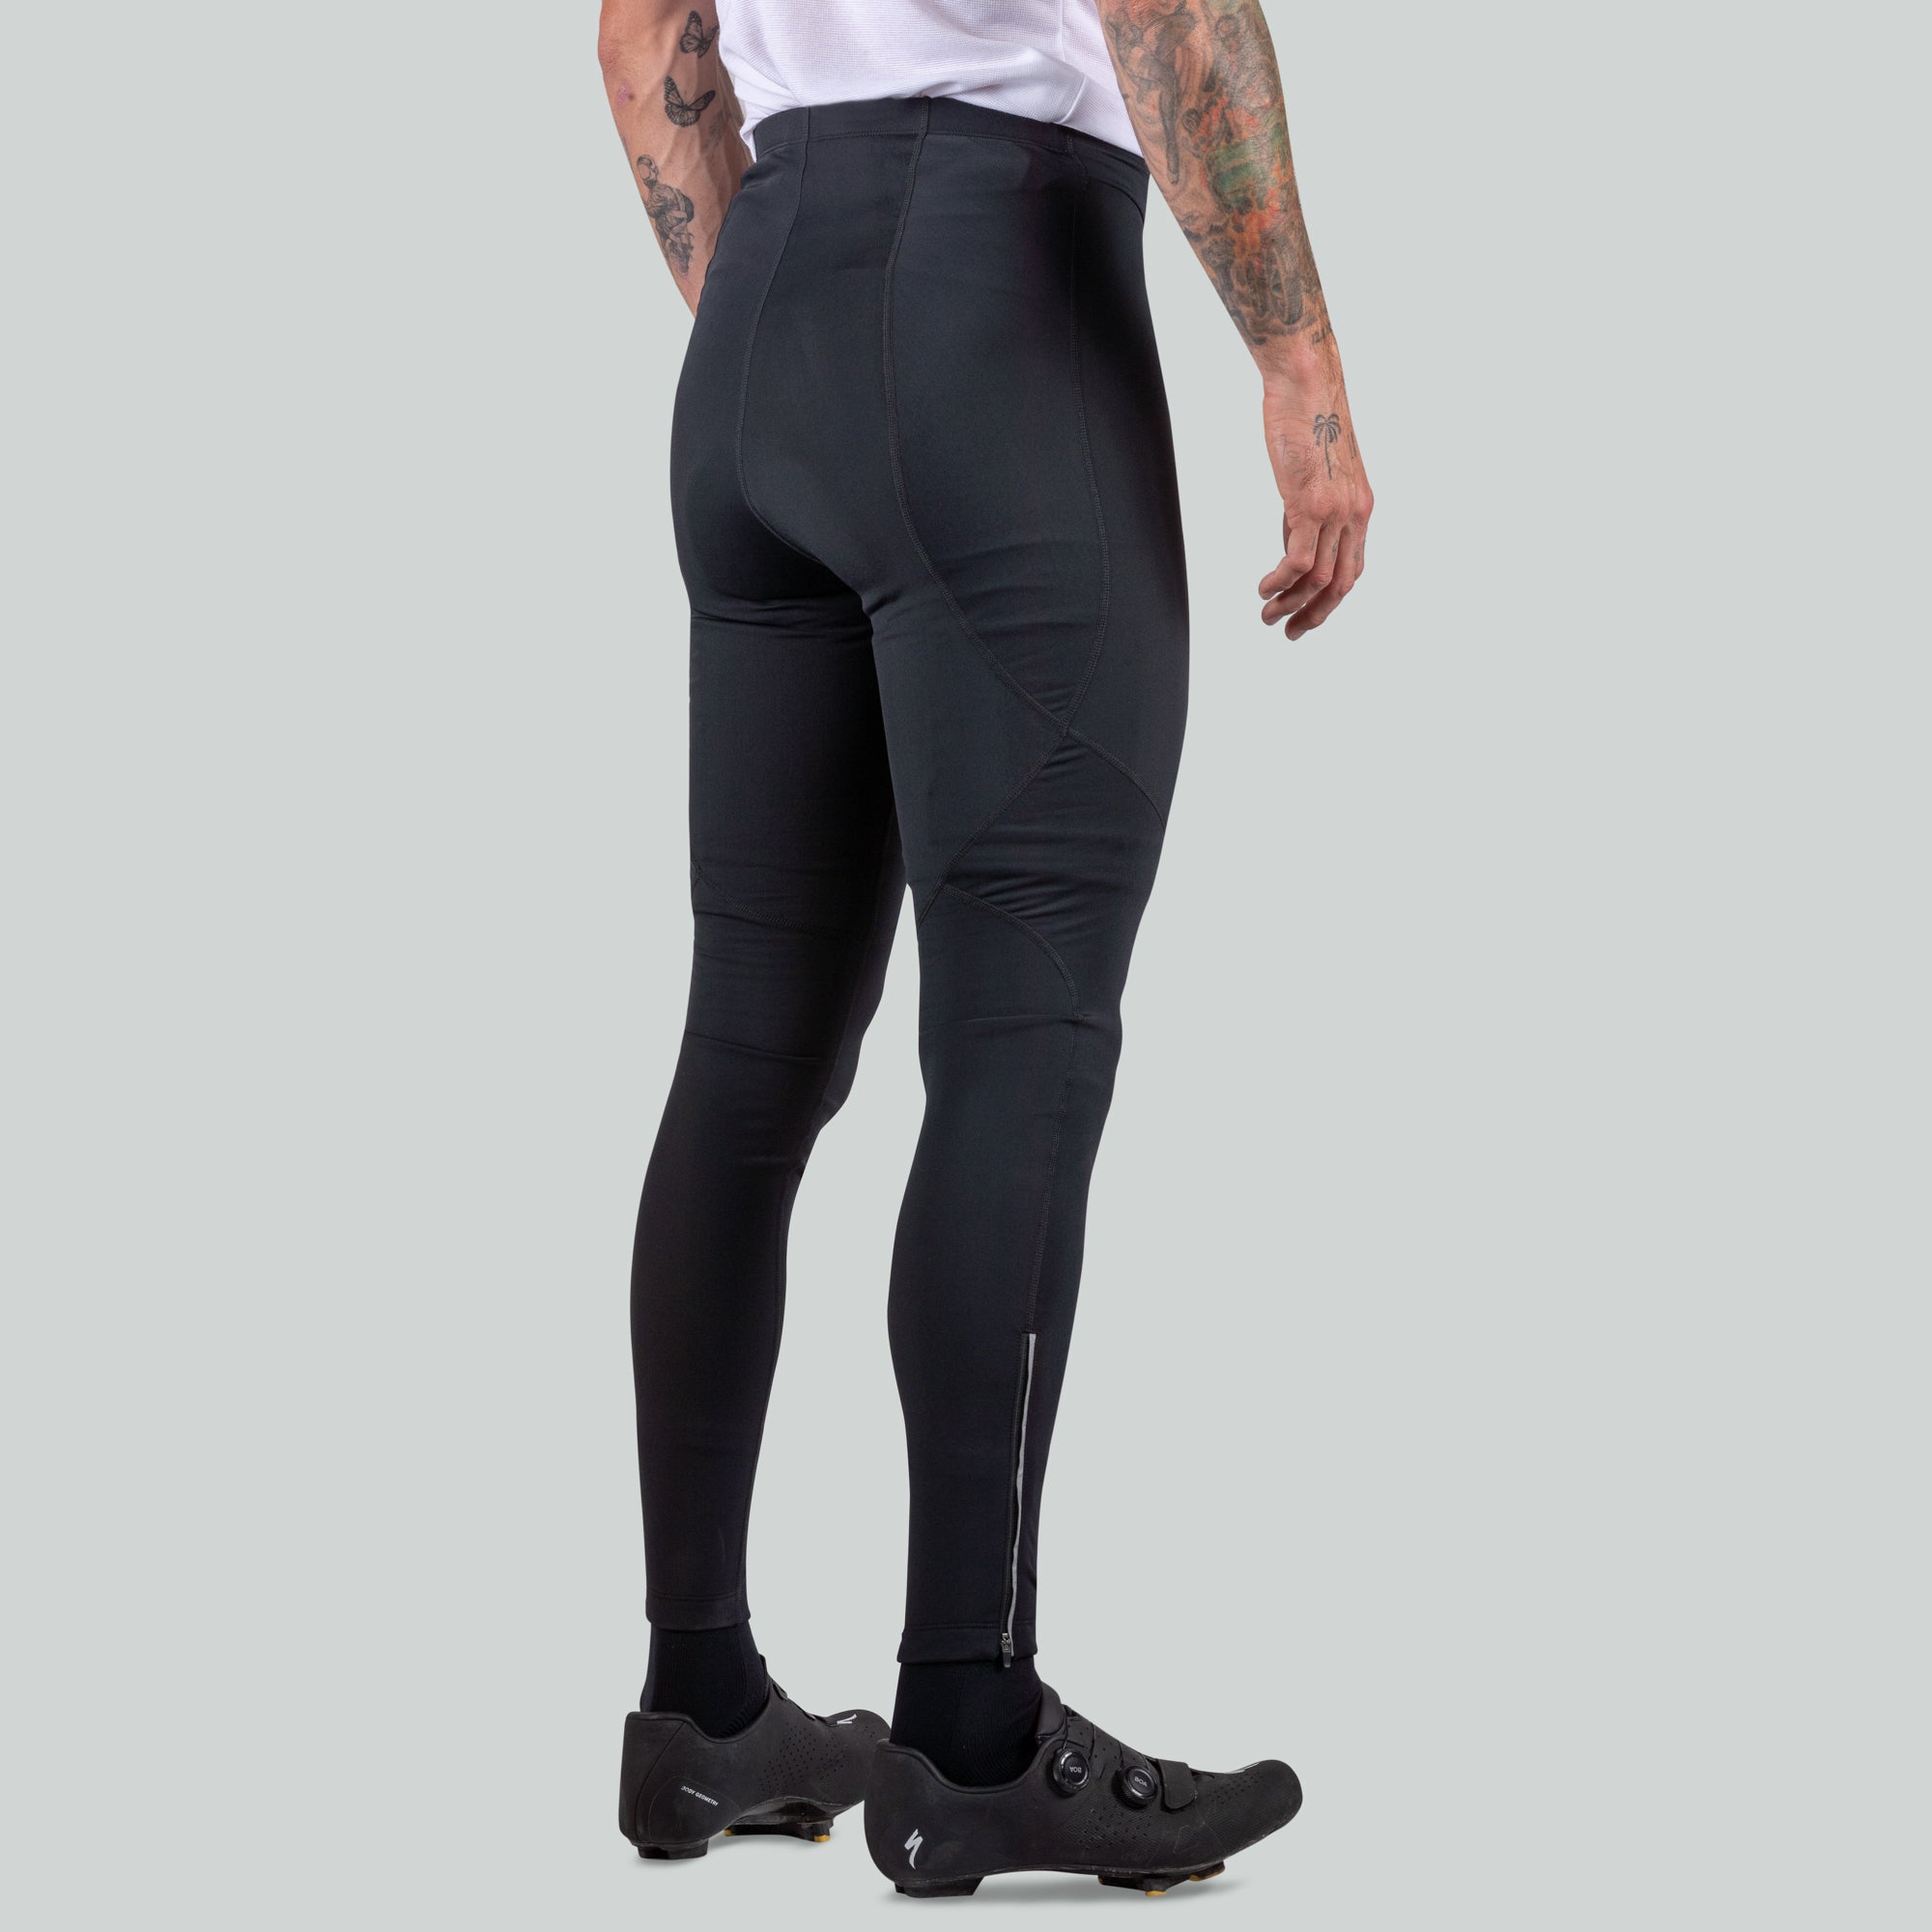 Men's Thermaldress Tight without Pad